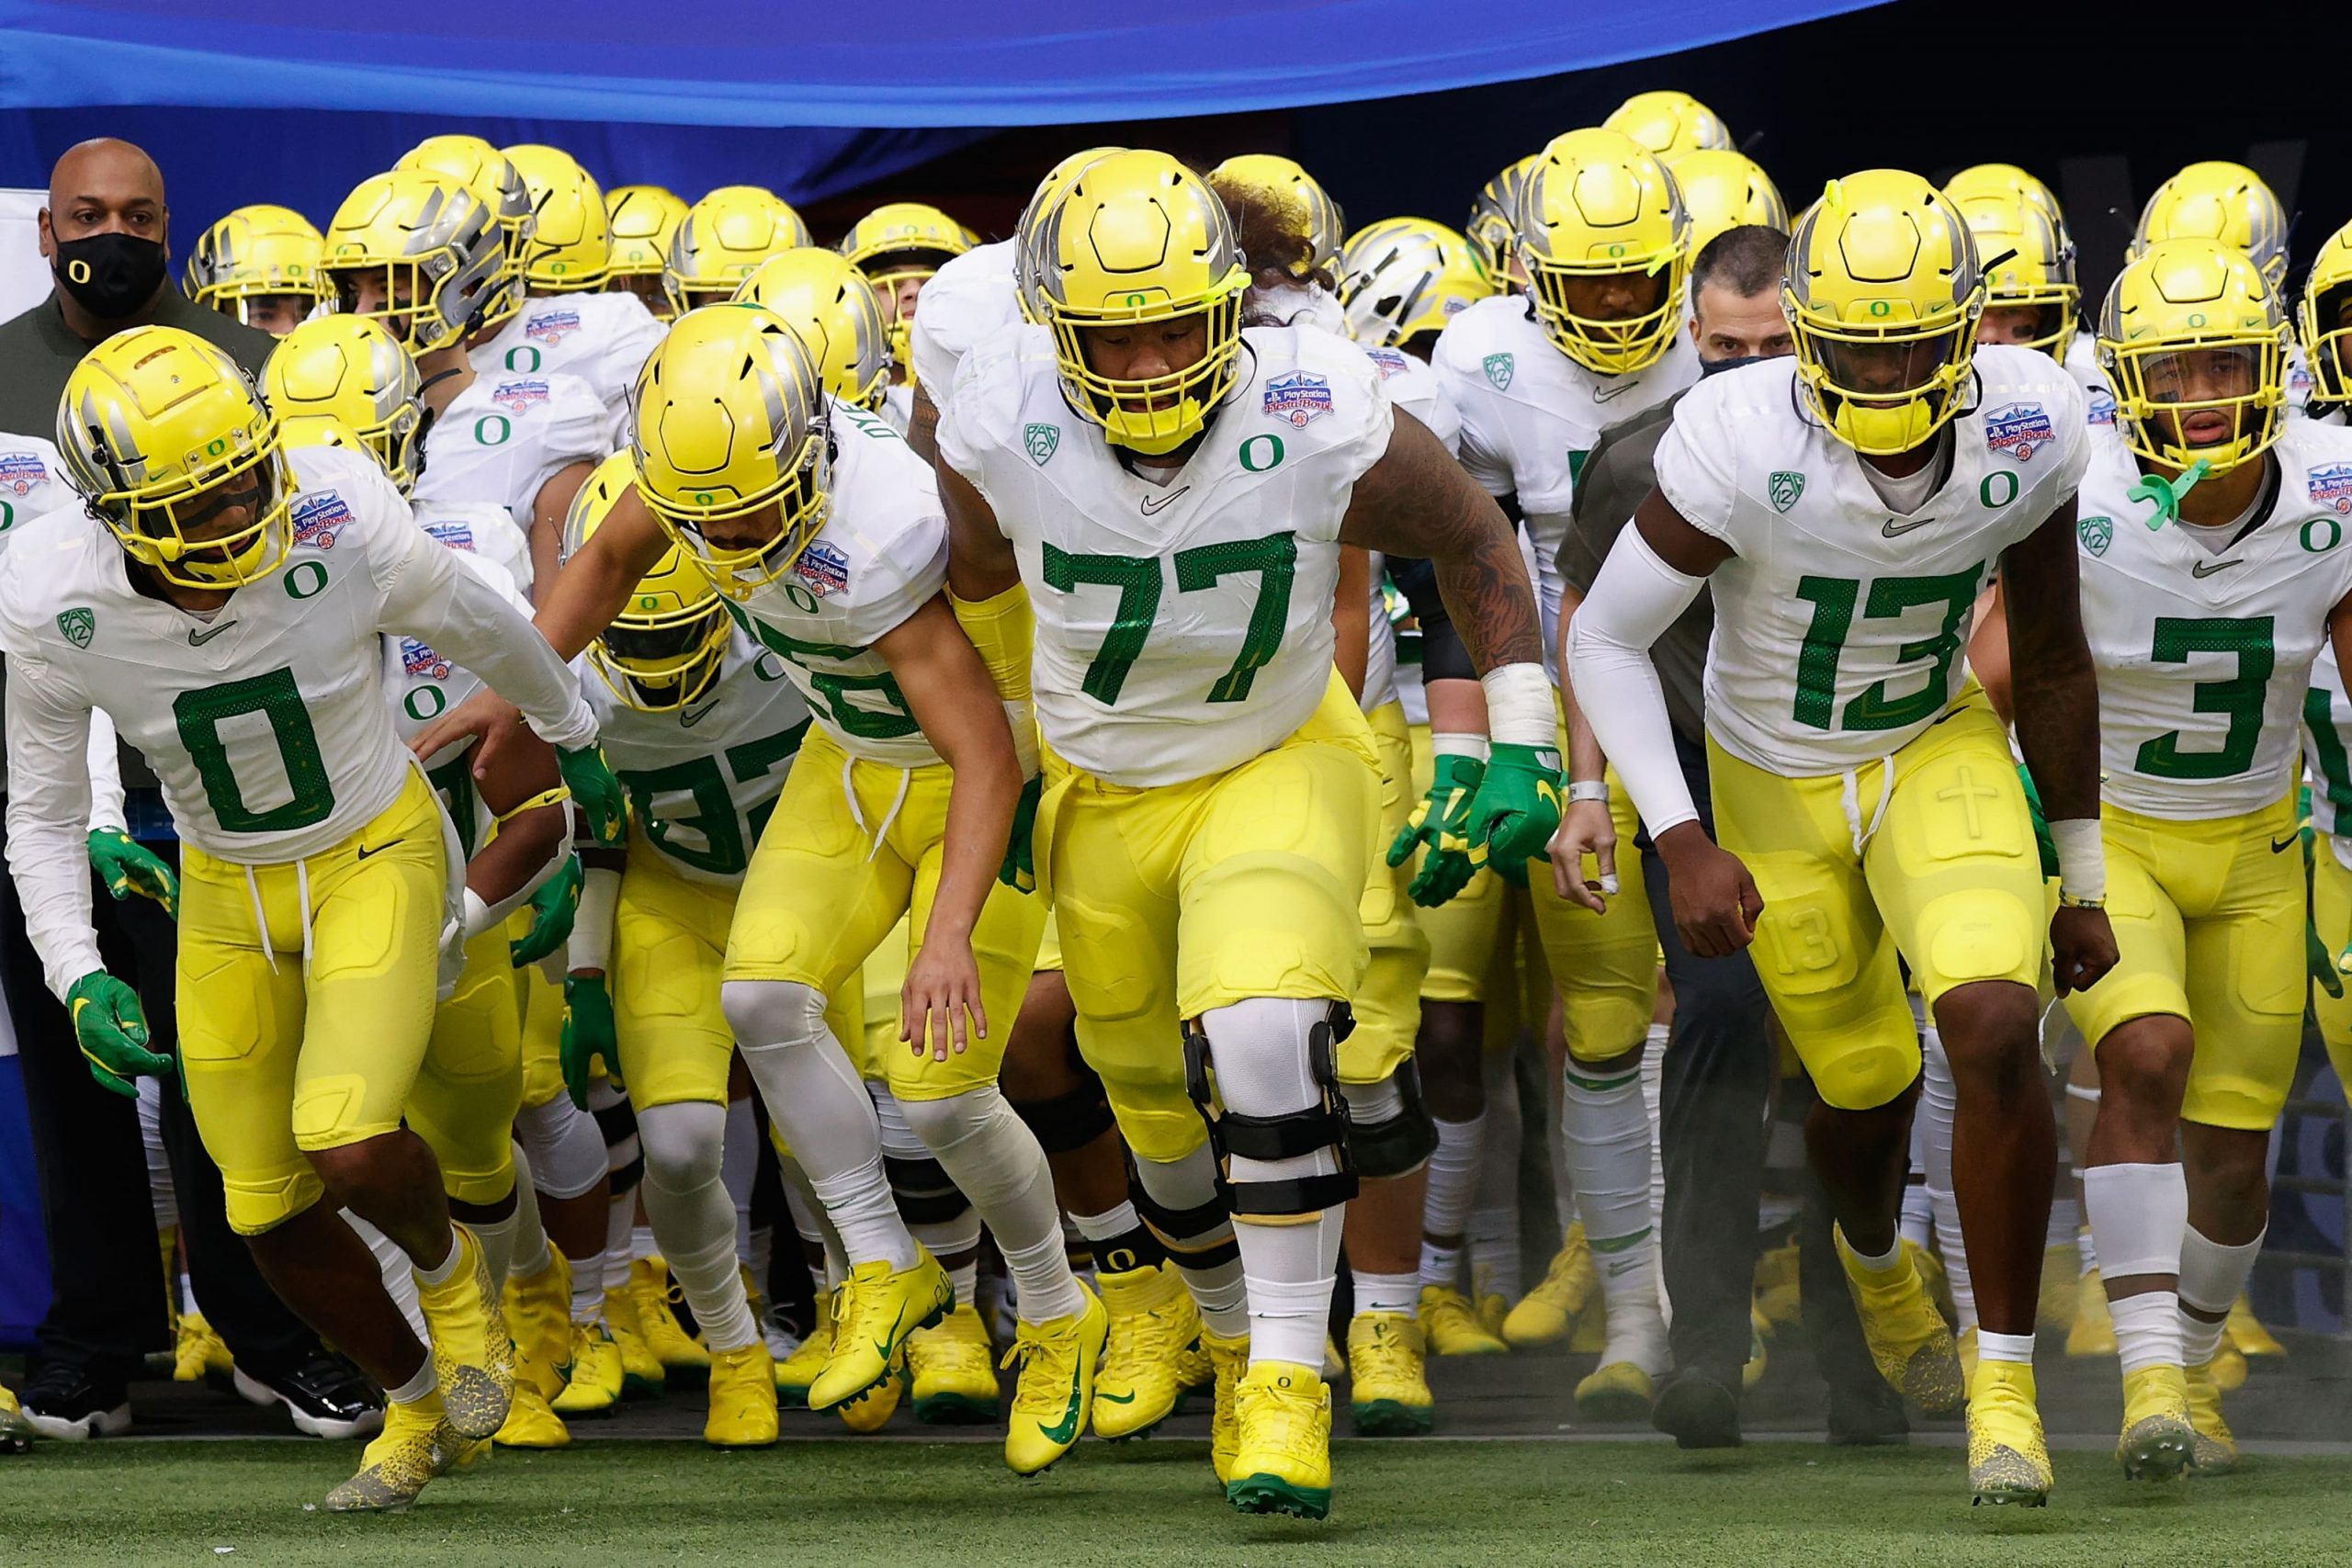 From Luckii More Than $1.1 Million in Prize Received by Oregon Players